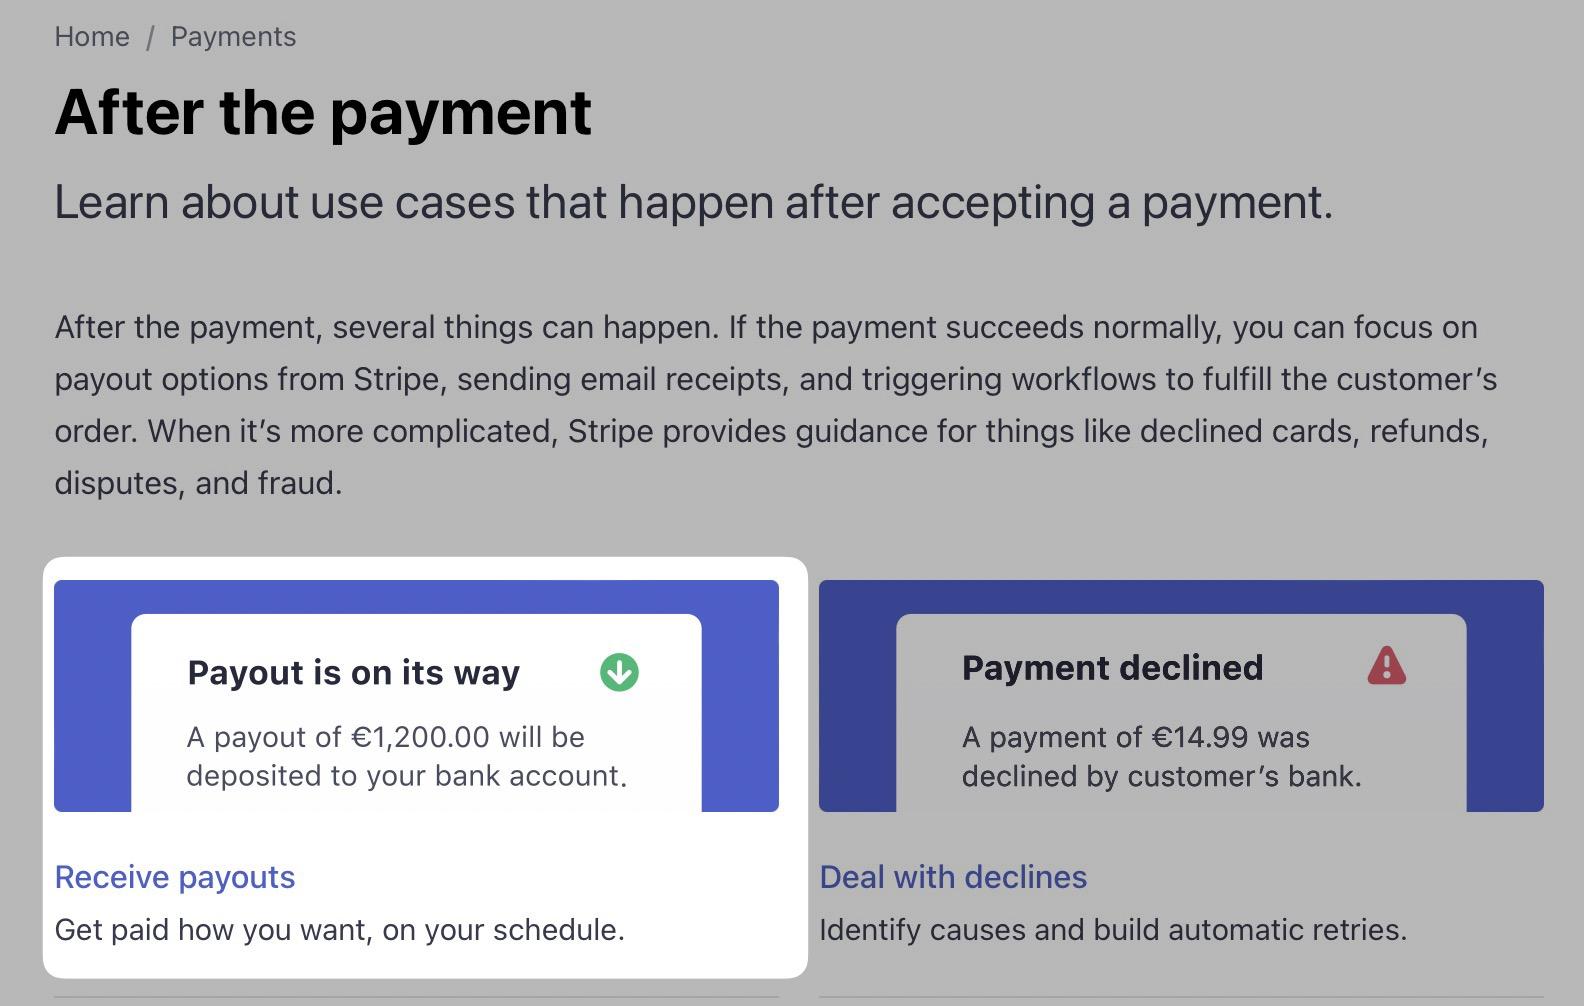 Stripe's "receive payouts" link